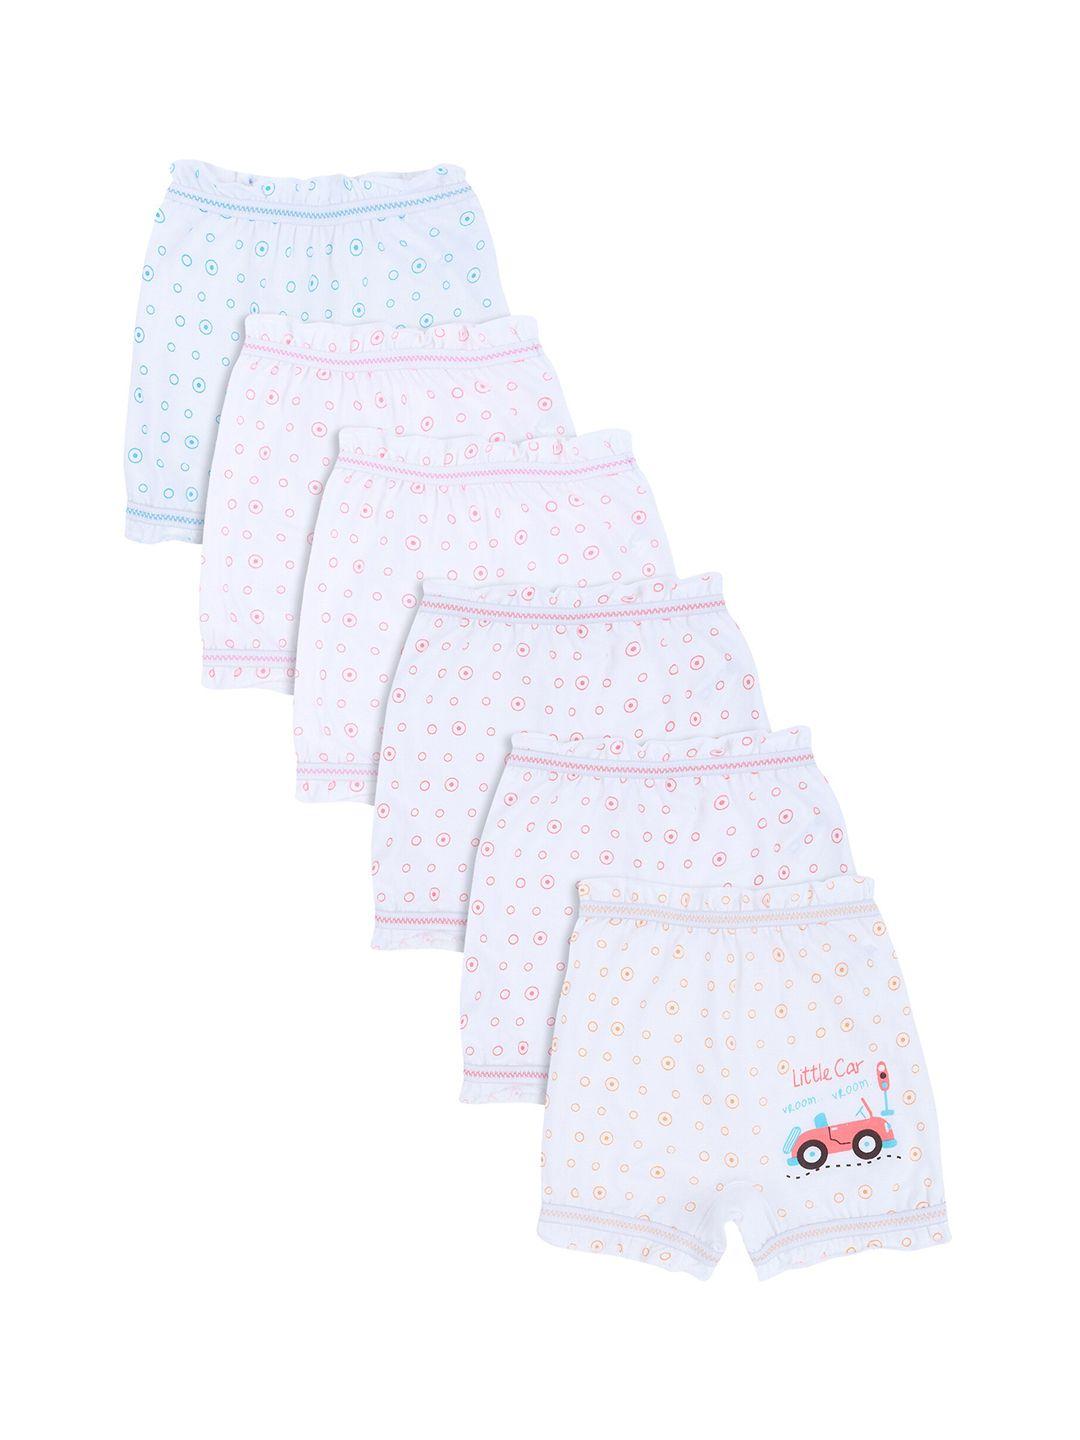 dyca kids white pack of 6 assorted printed briefs